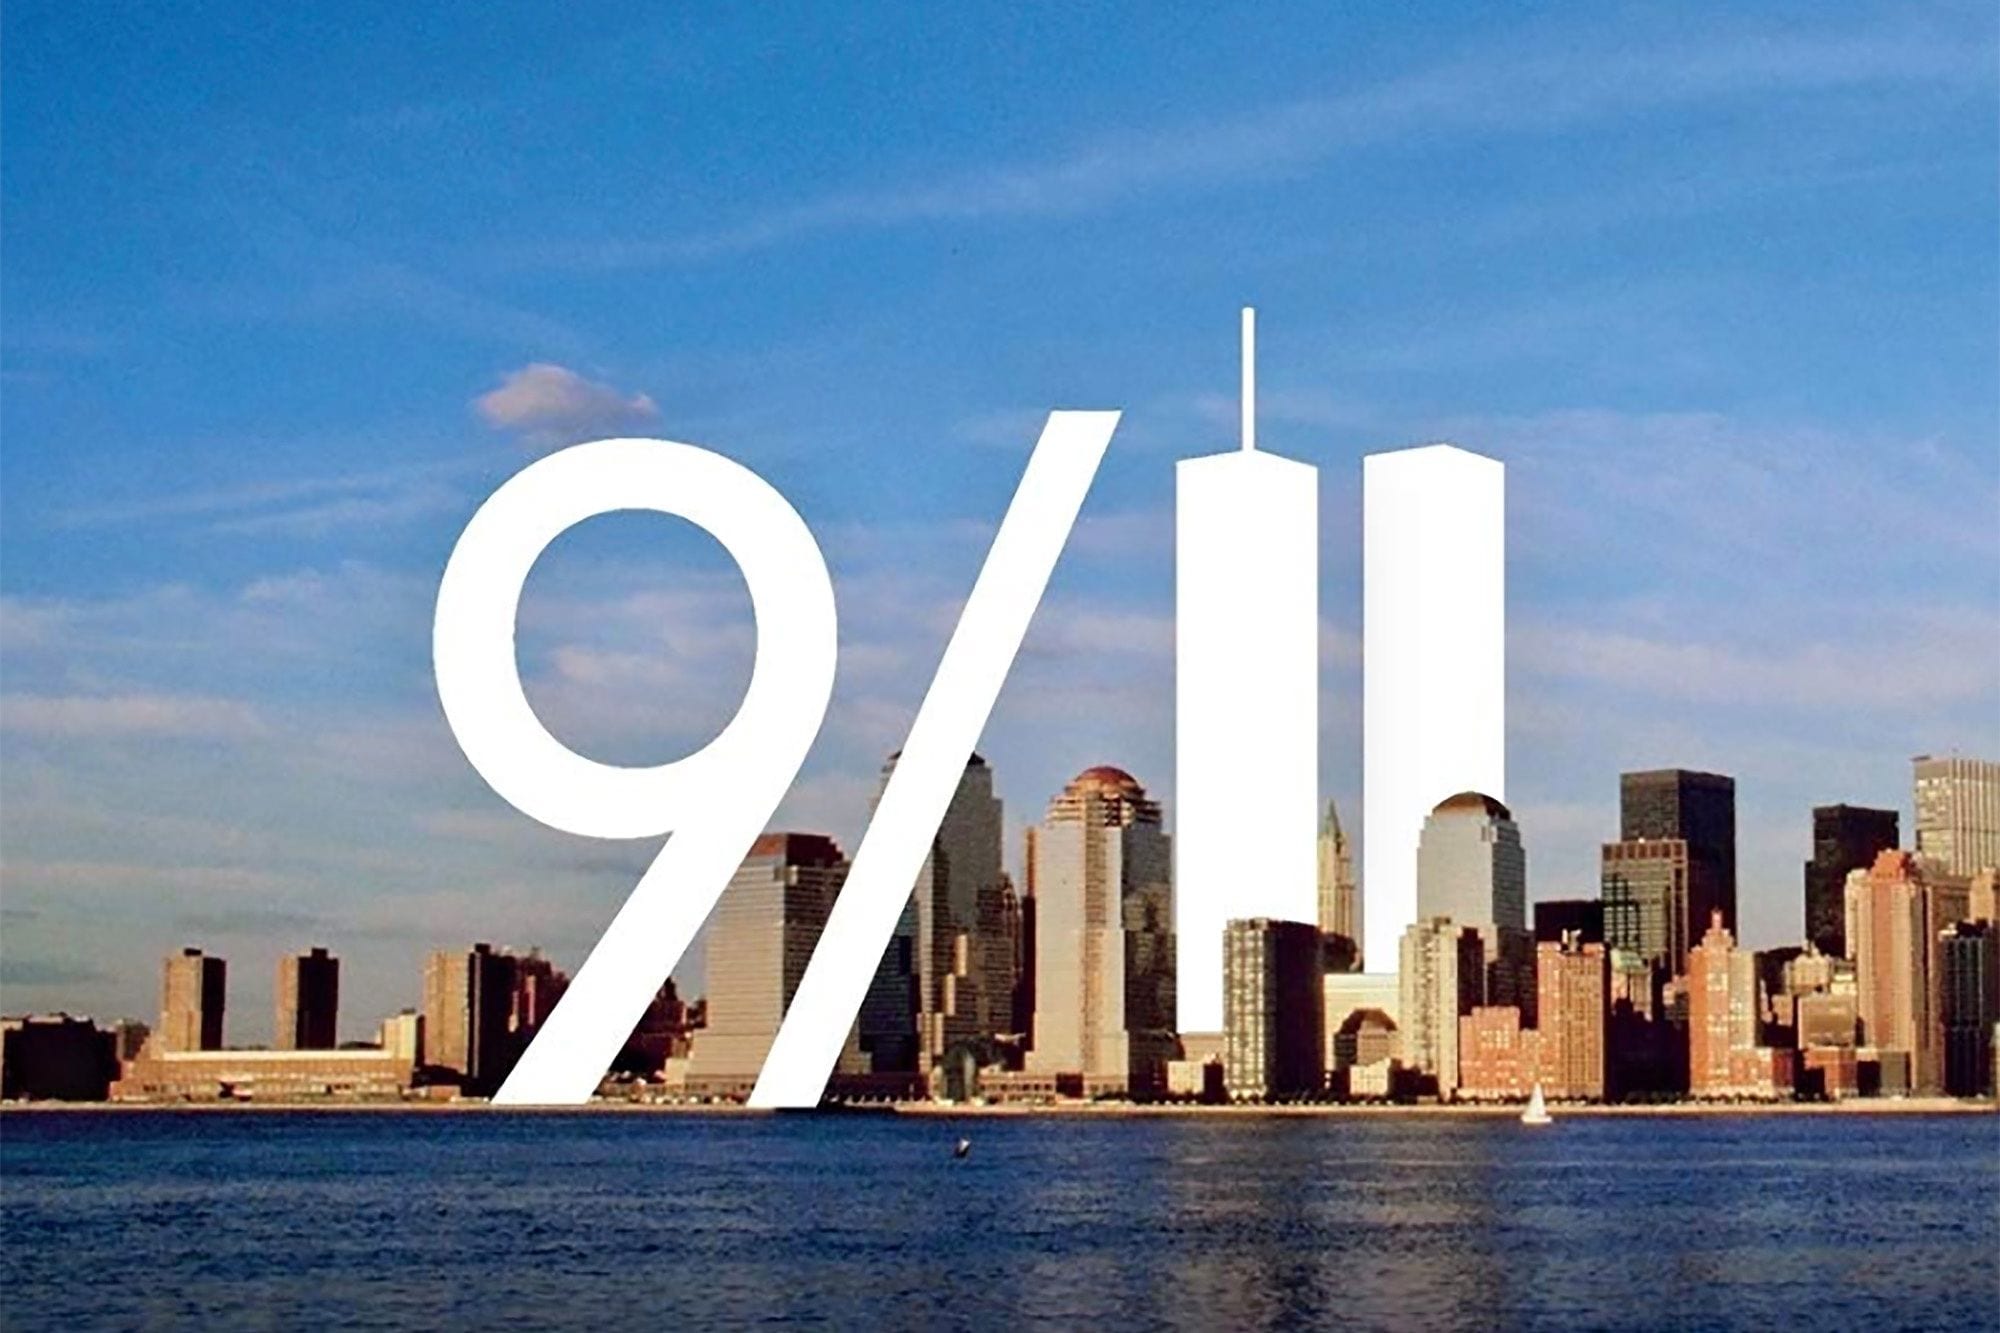 9-11-and-the-visual-culture-of-disaster-by-thomas-stubblefield